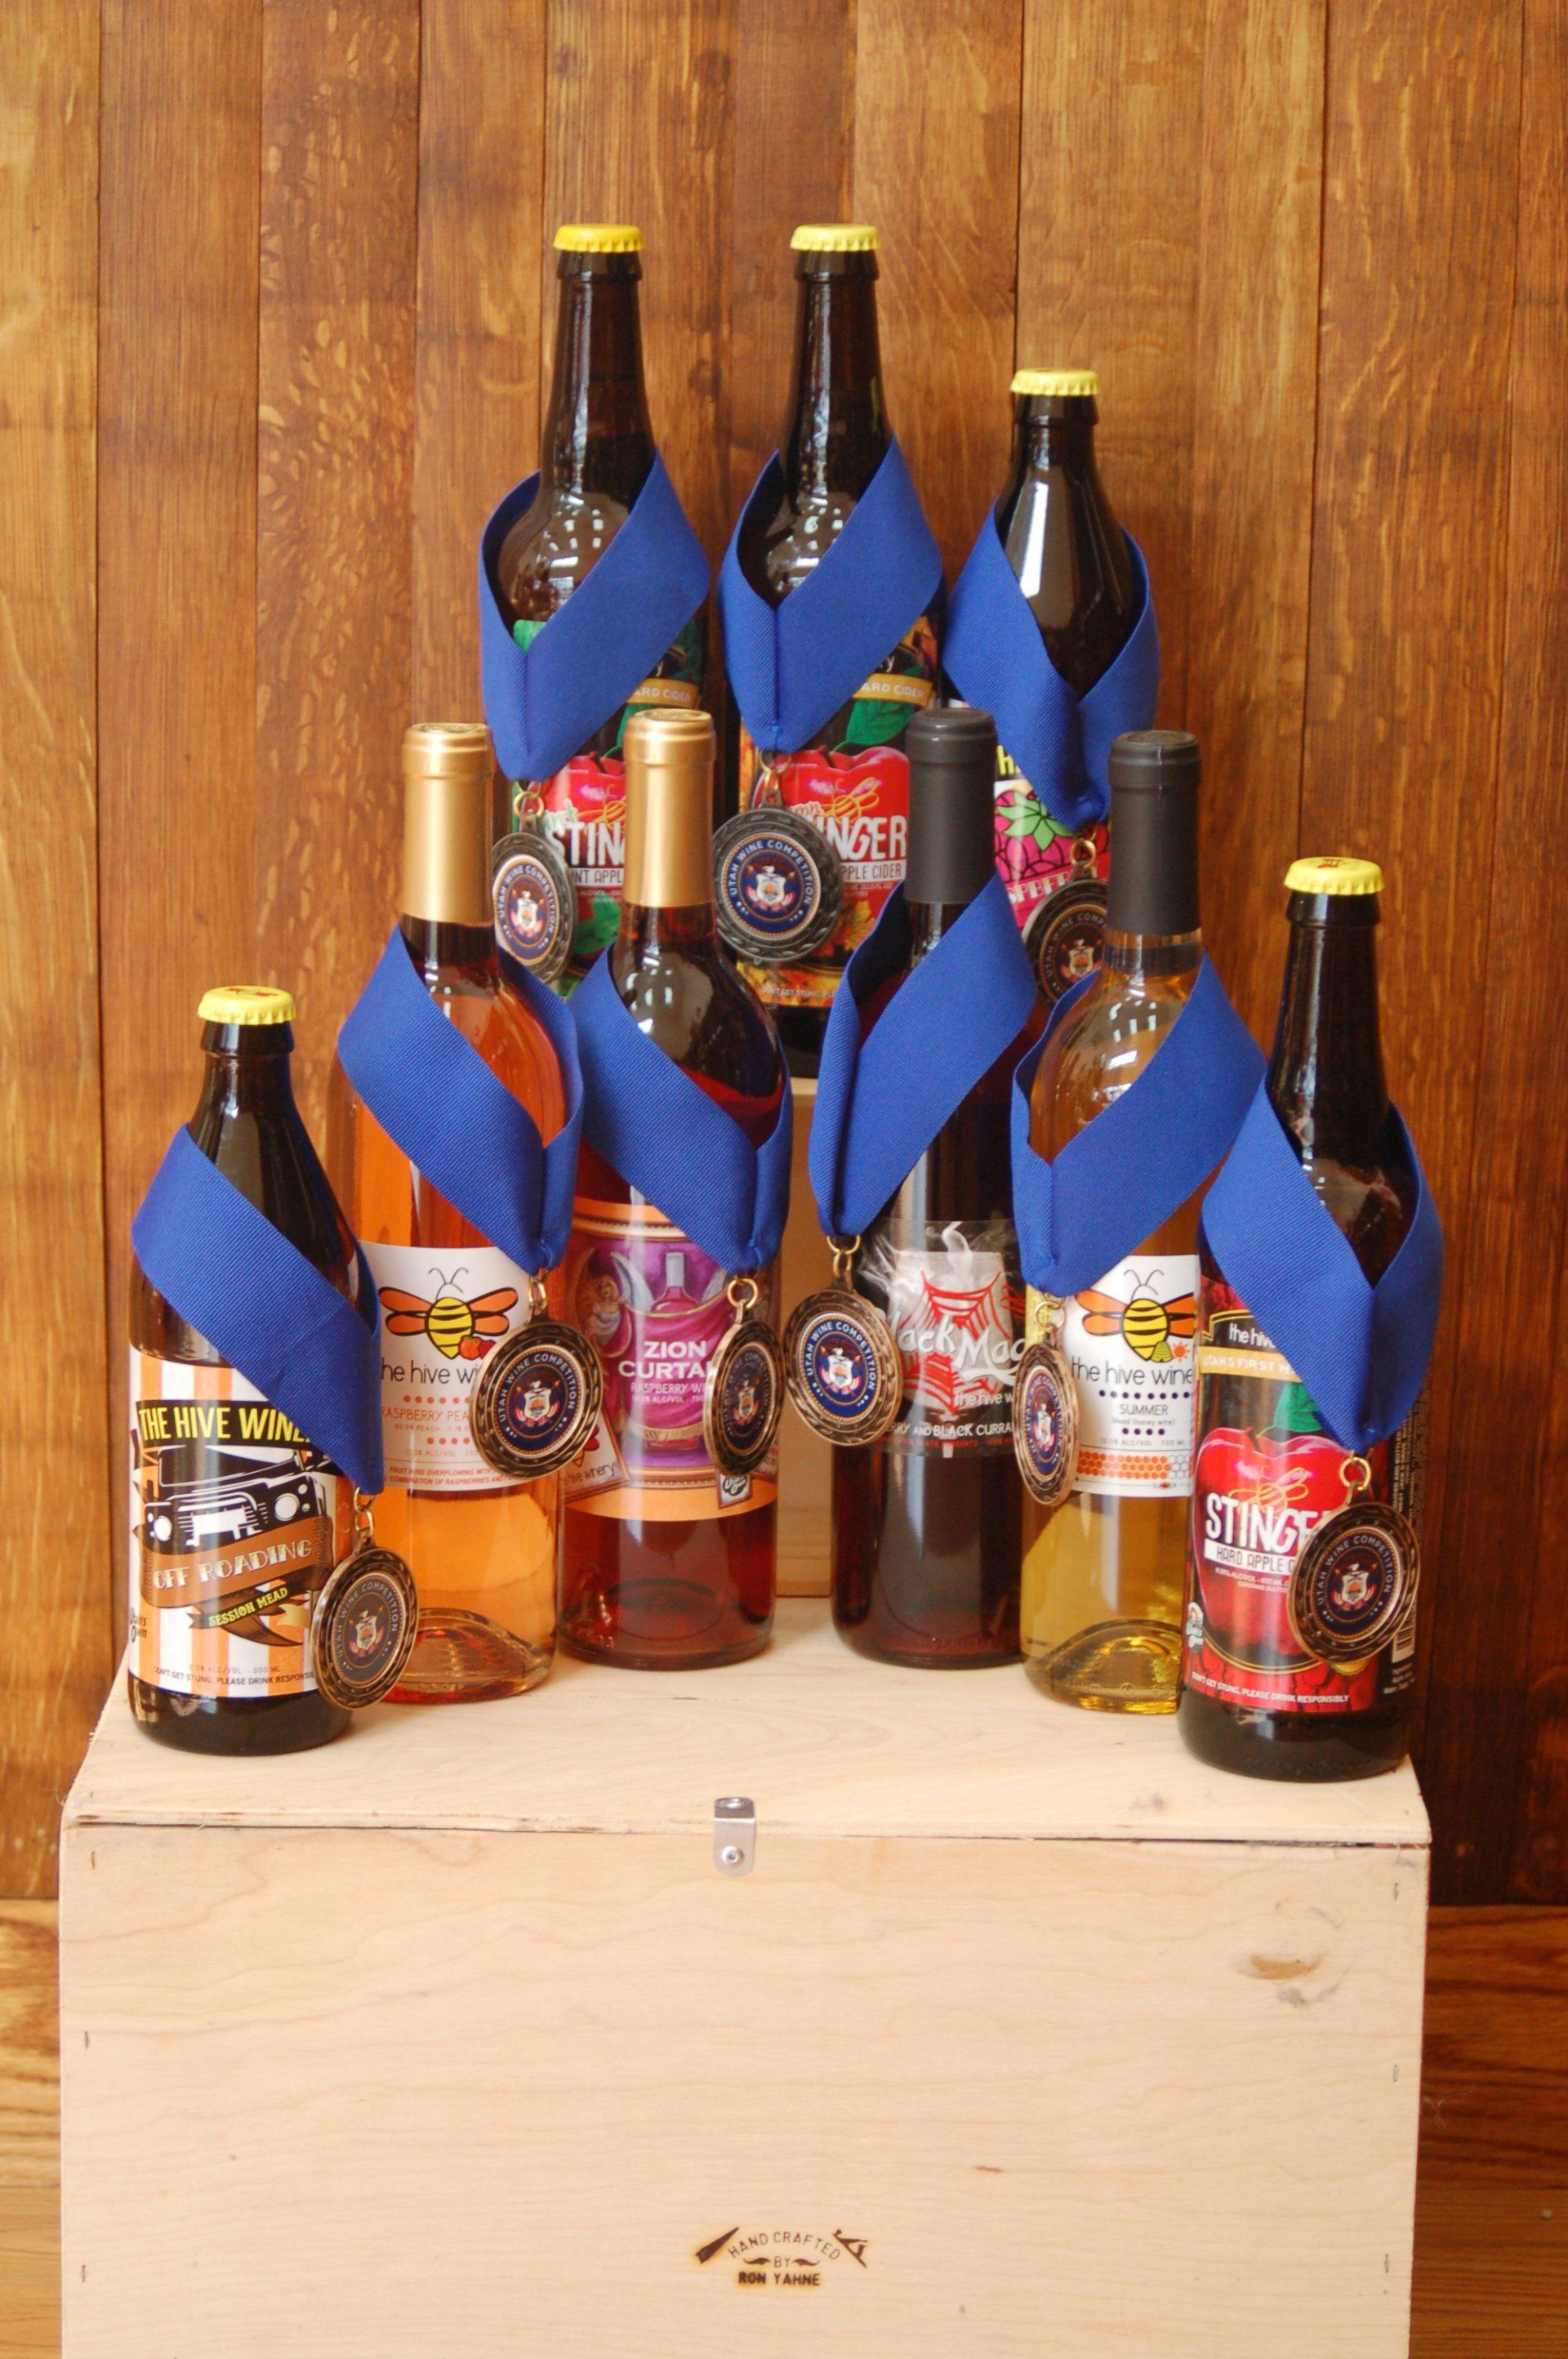 Bottles of fruit wine, hard cider, and session mead set against a wooden  background each bottle with and award ribbon.